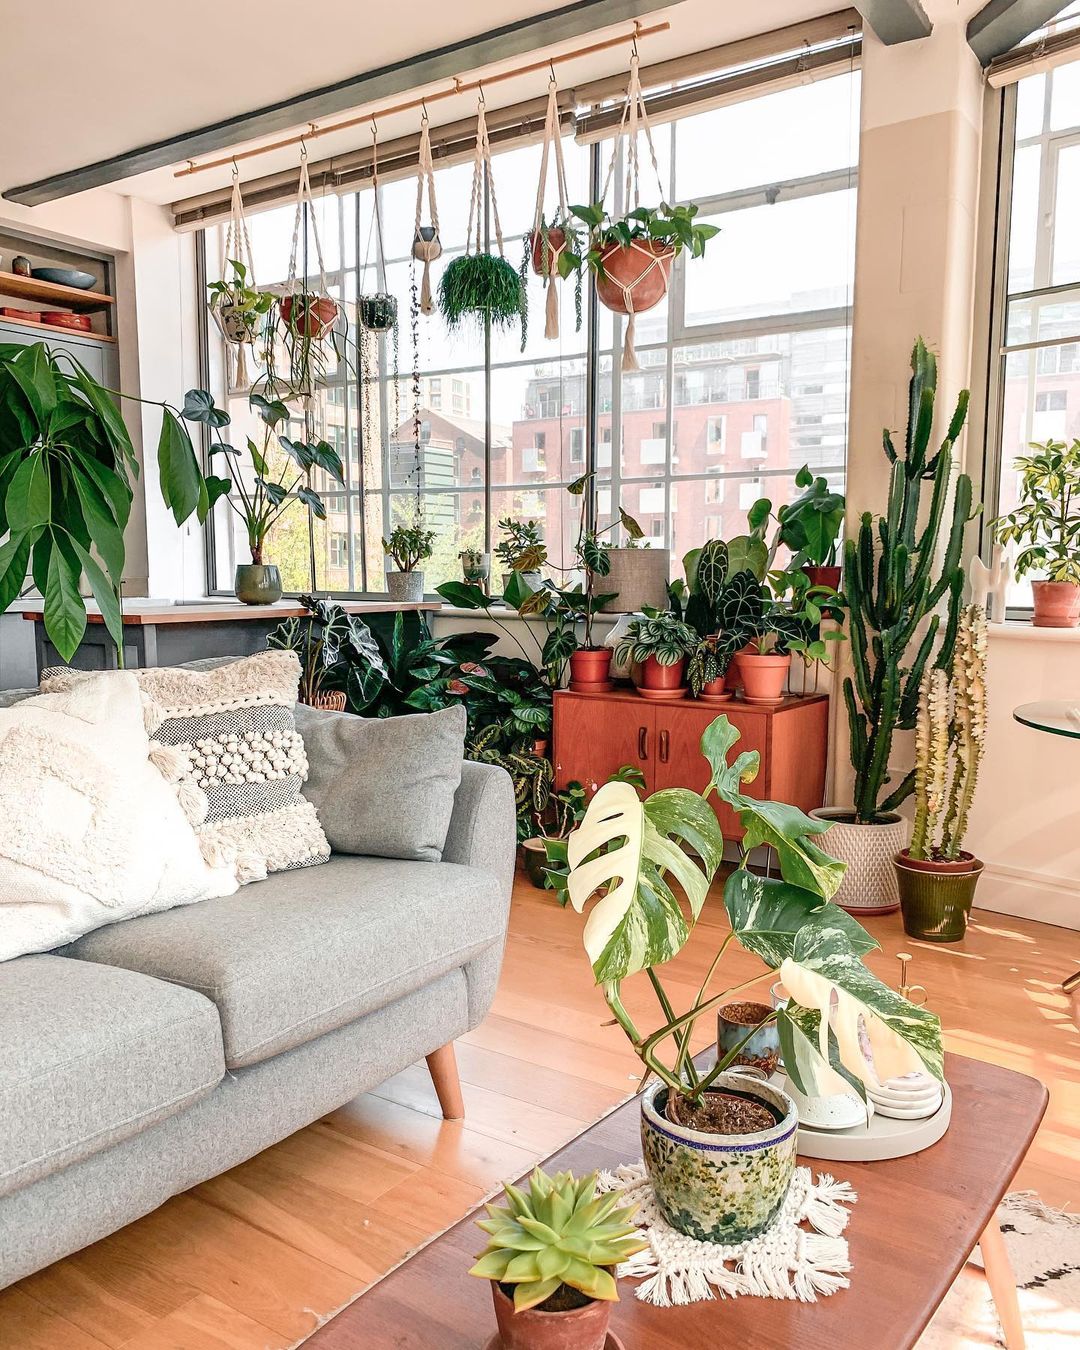 Living room with plants hanging from the ceiling, on the floor, and on shelves. Photo by Instagram user @themacramejungle.